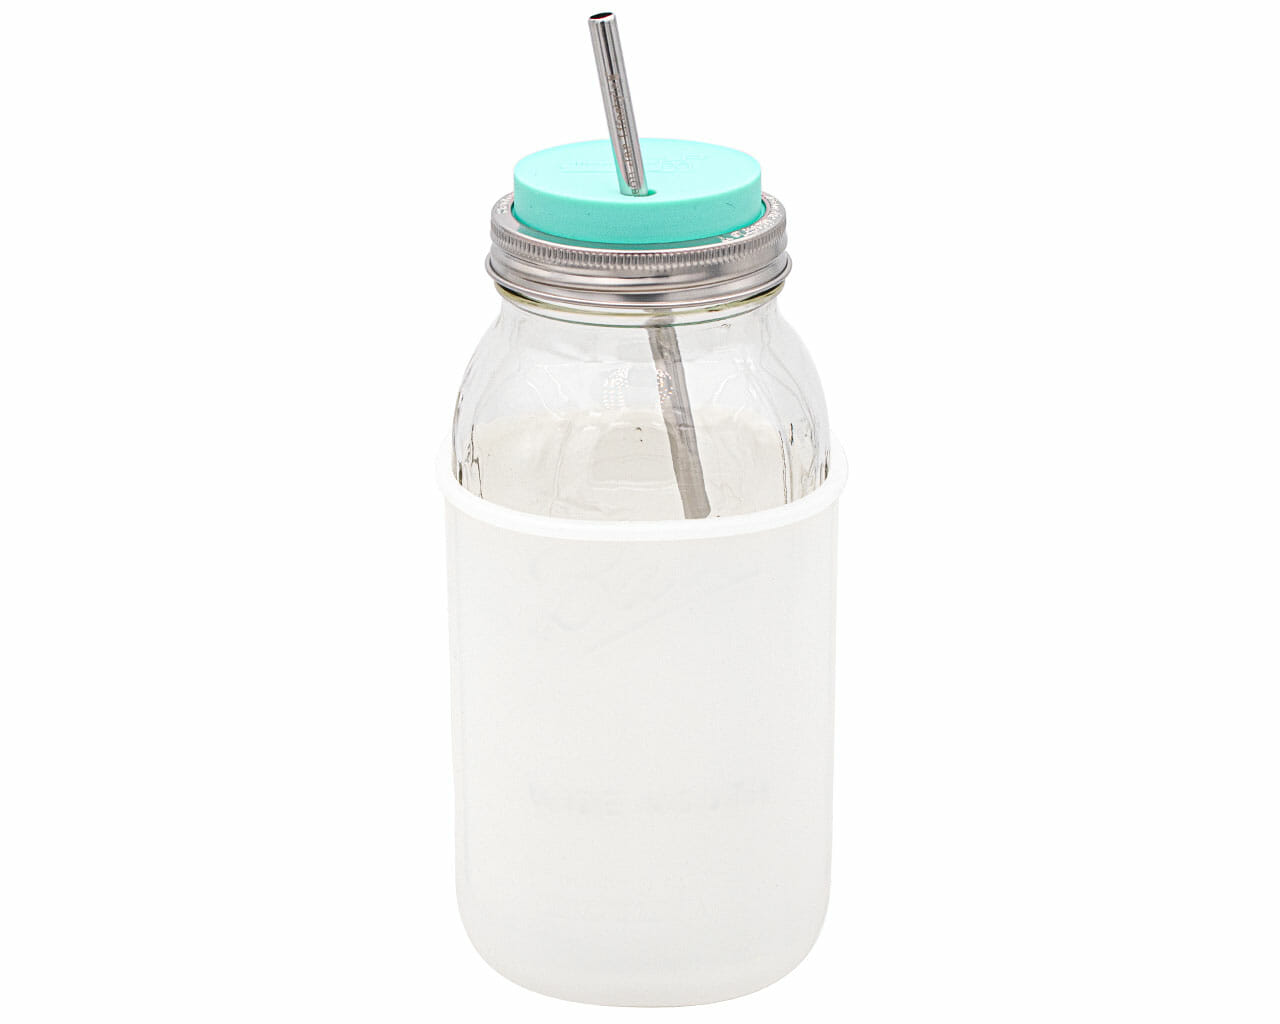 frost silicone sleeve for wide mouth half gallon 64oz mason jars with aquamarine silicone straw hole lid and long stainless steel straw